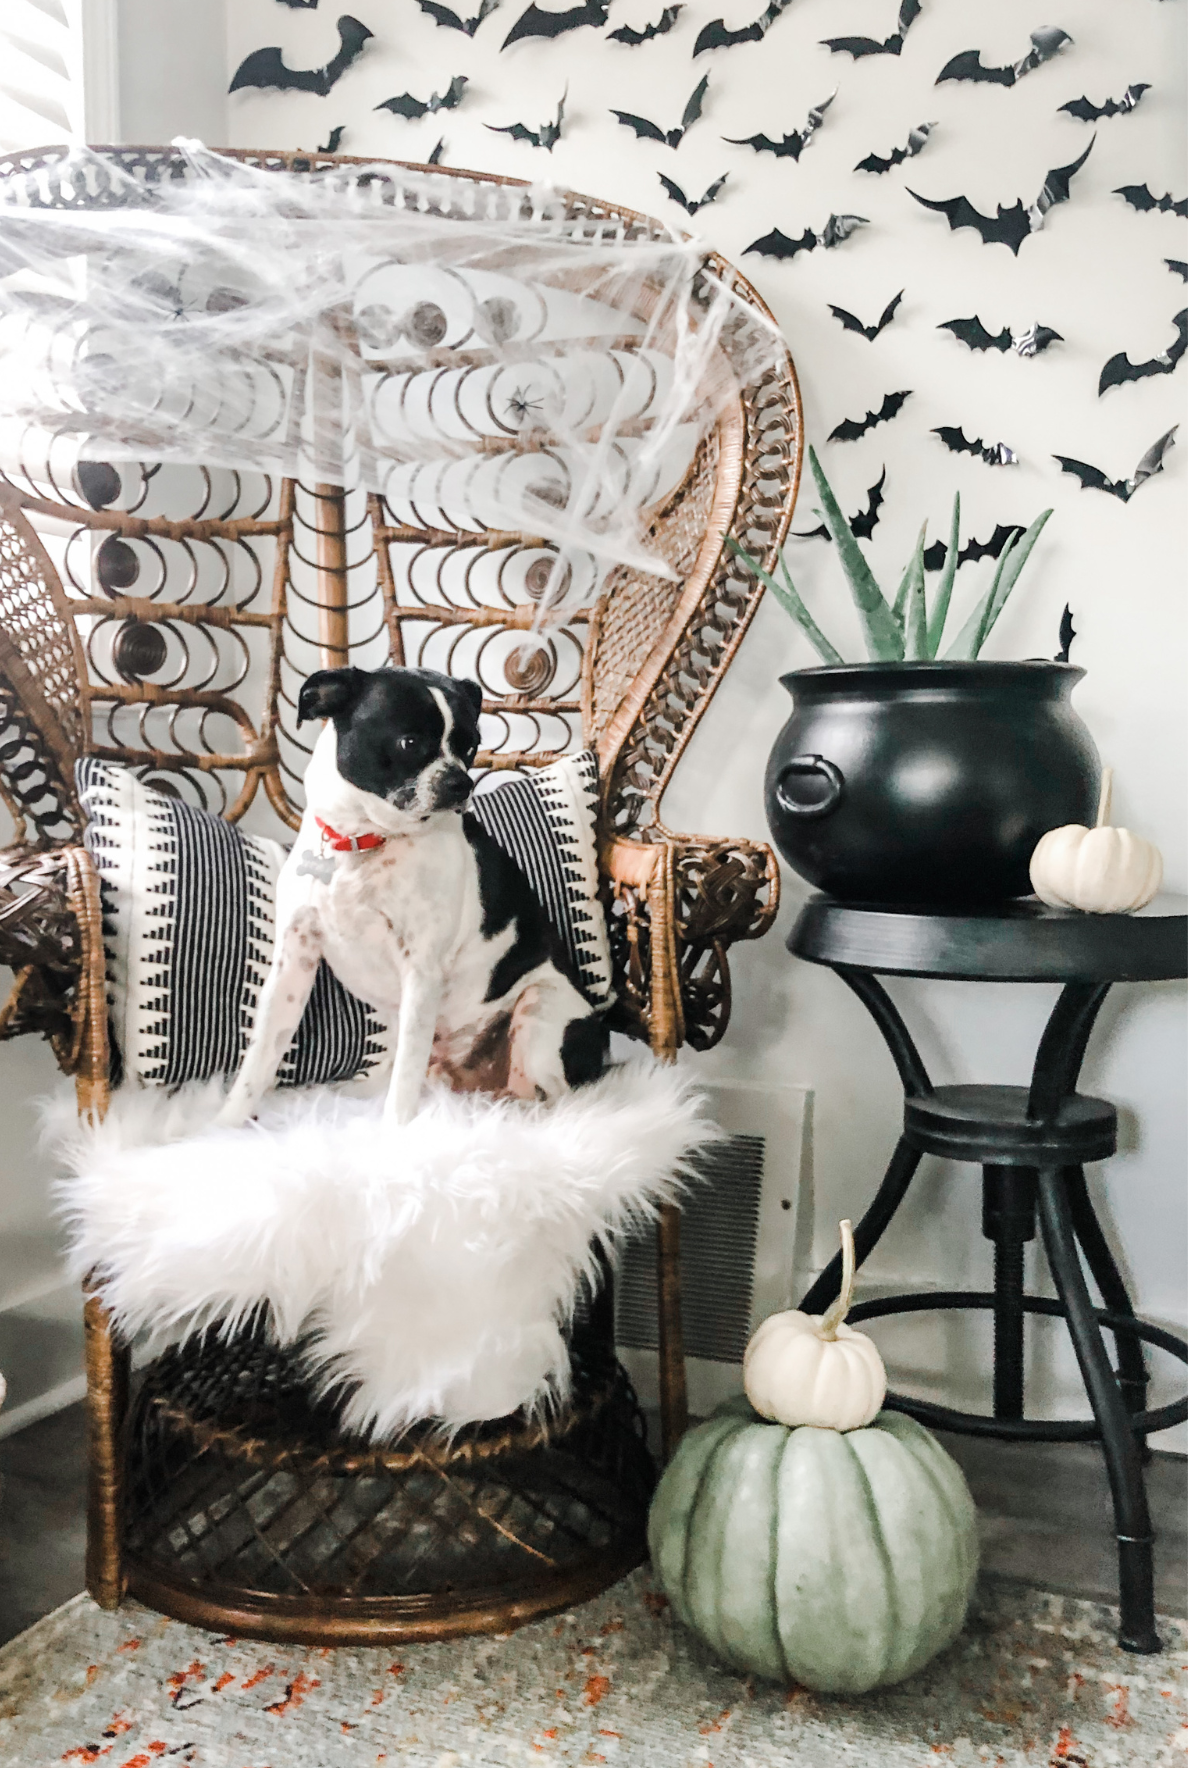 How to Elevate Holiday Themes to Match Your Aesthetic: Halloween Edition